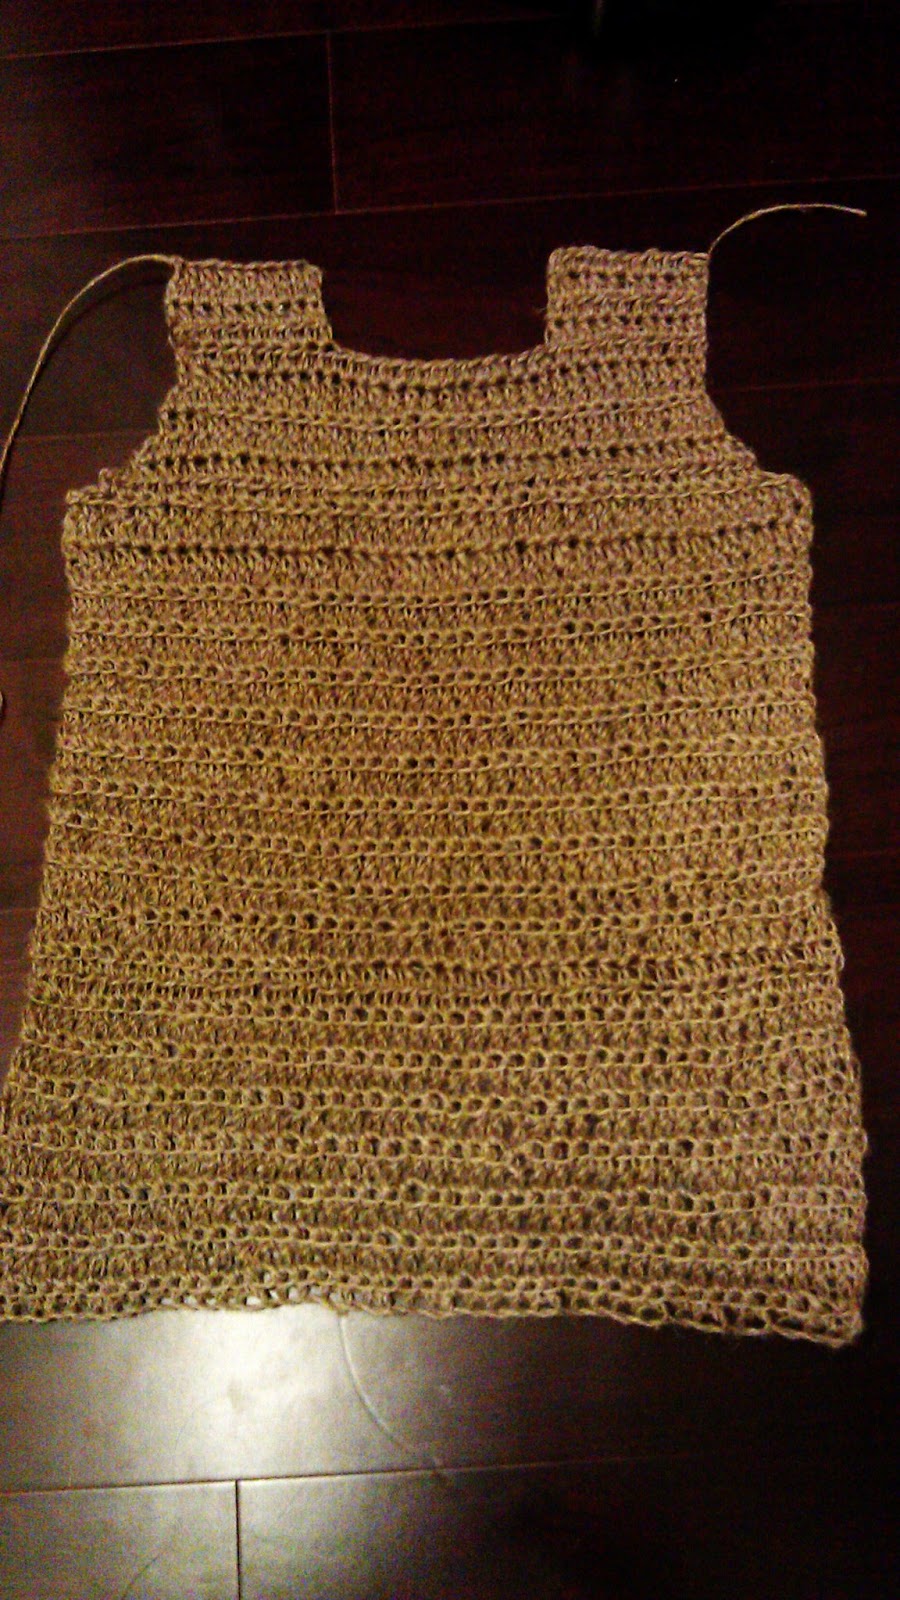 Crochet Fangirl: Crocheted Chainmail